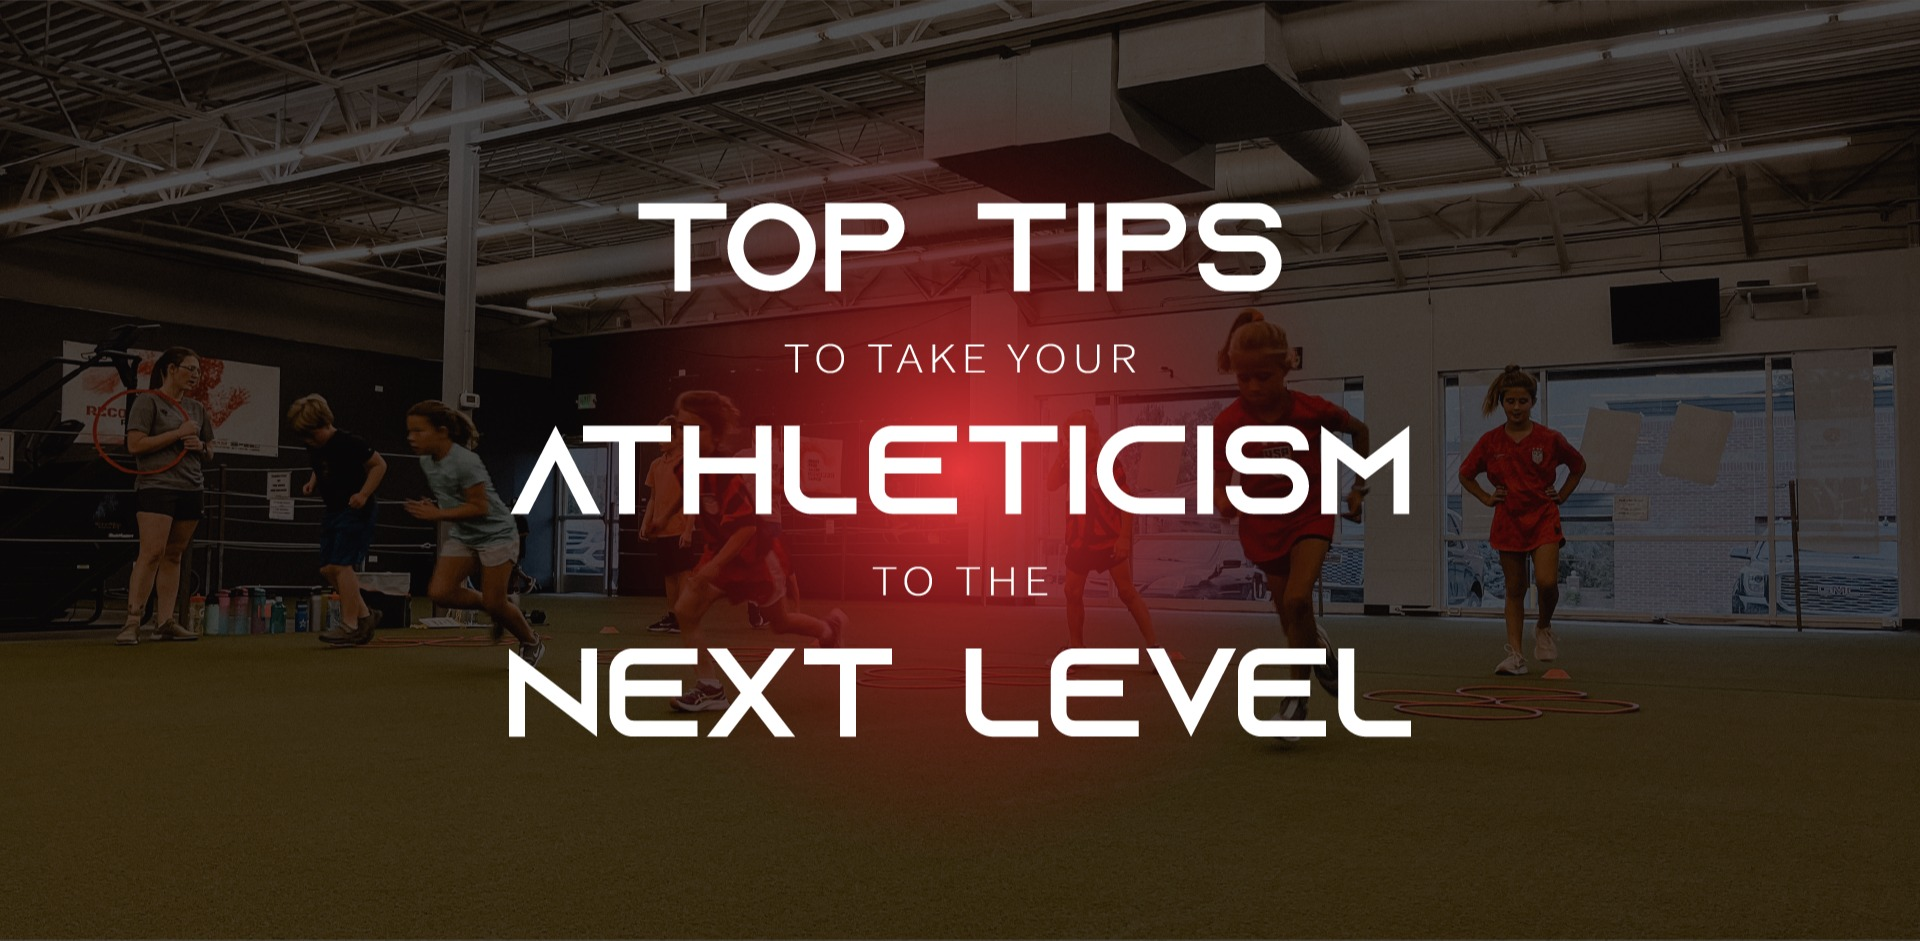 
Top Tips to Take Your Athleticism to the Next Level